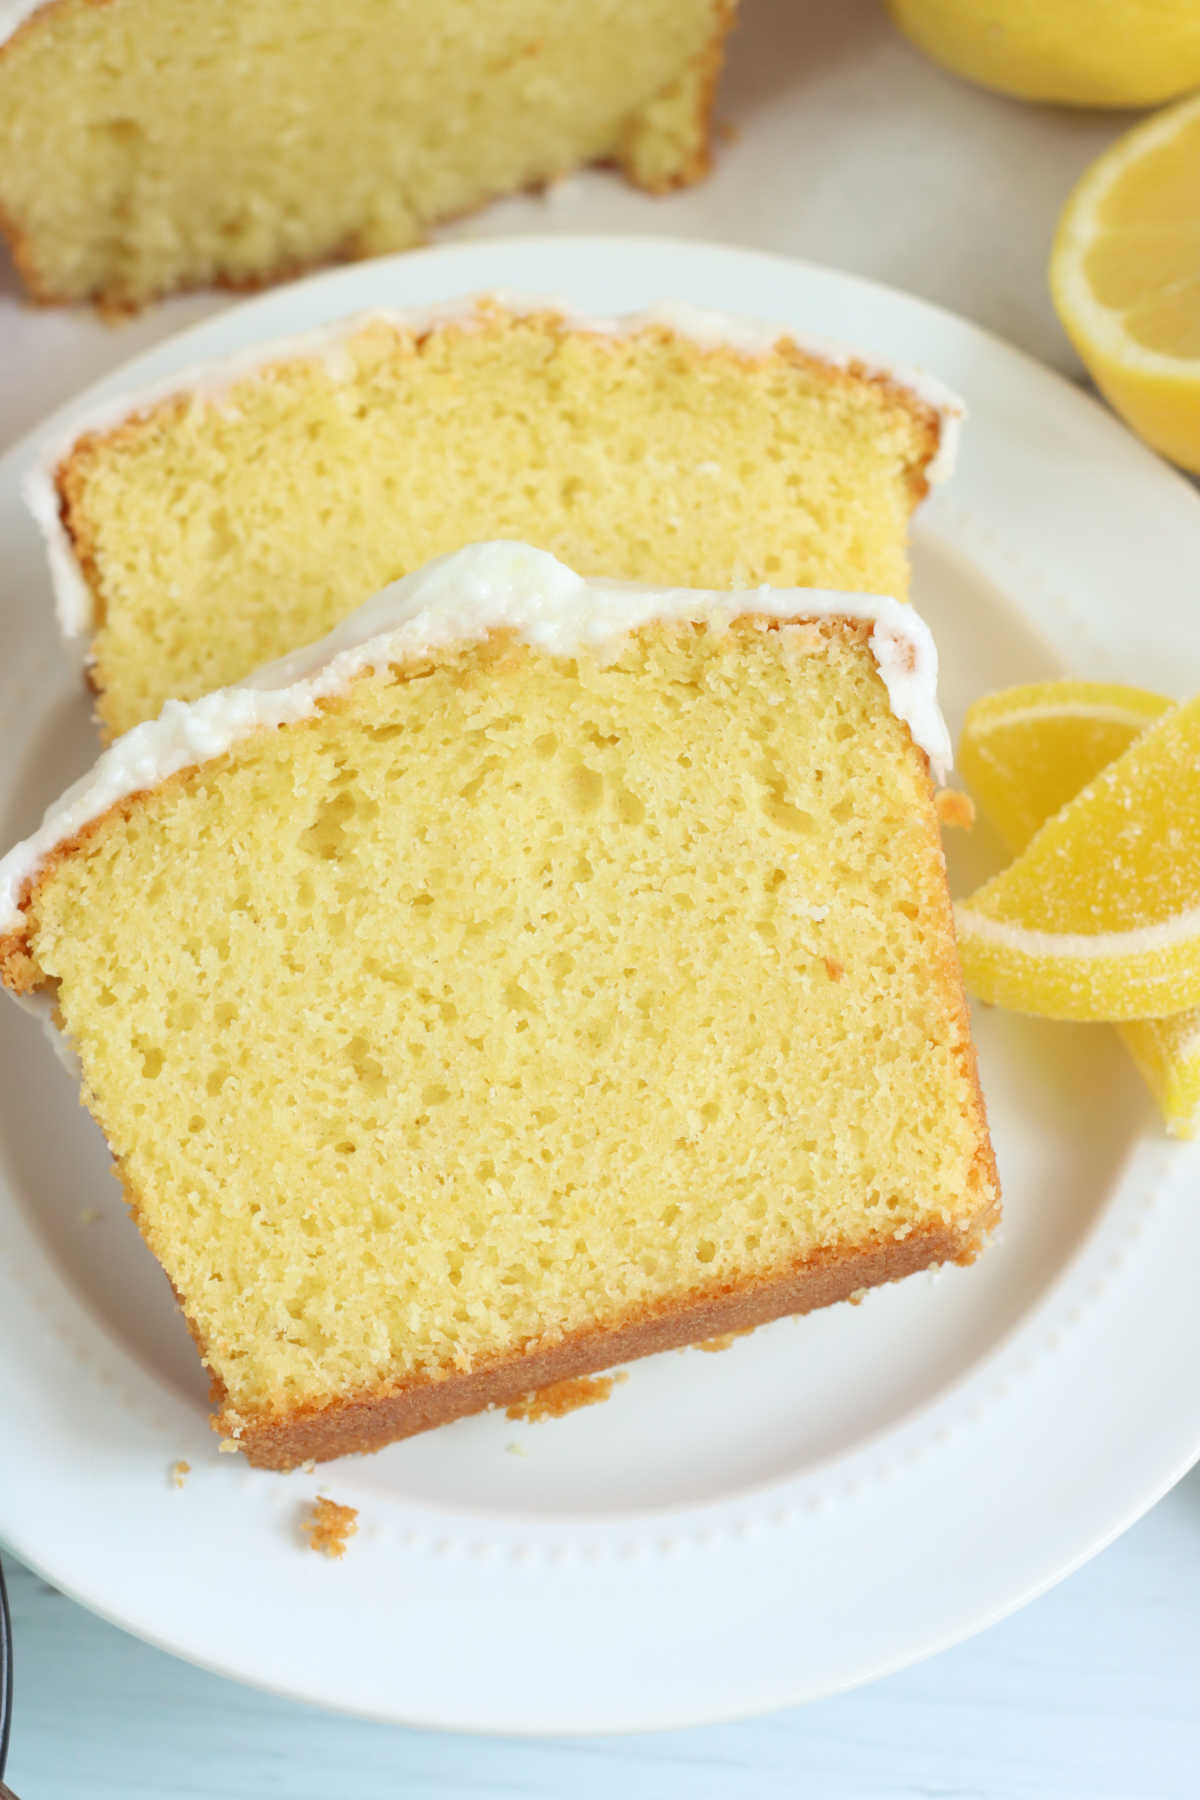 Slices of lemon cake with icing on small white plate.